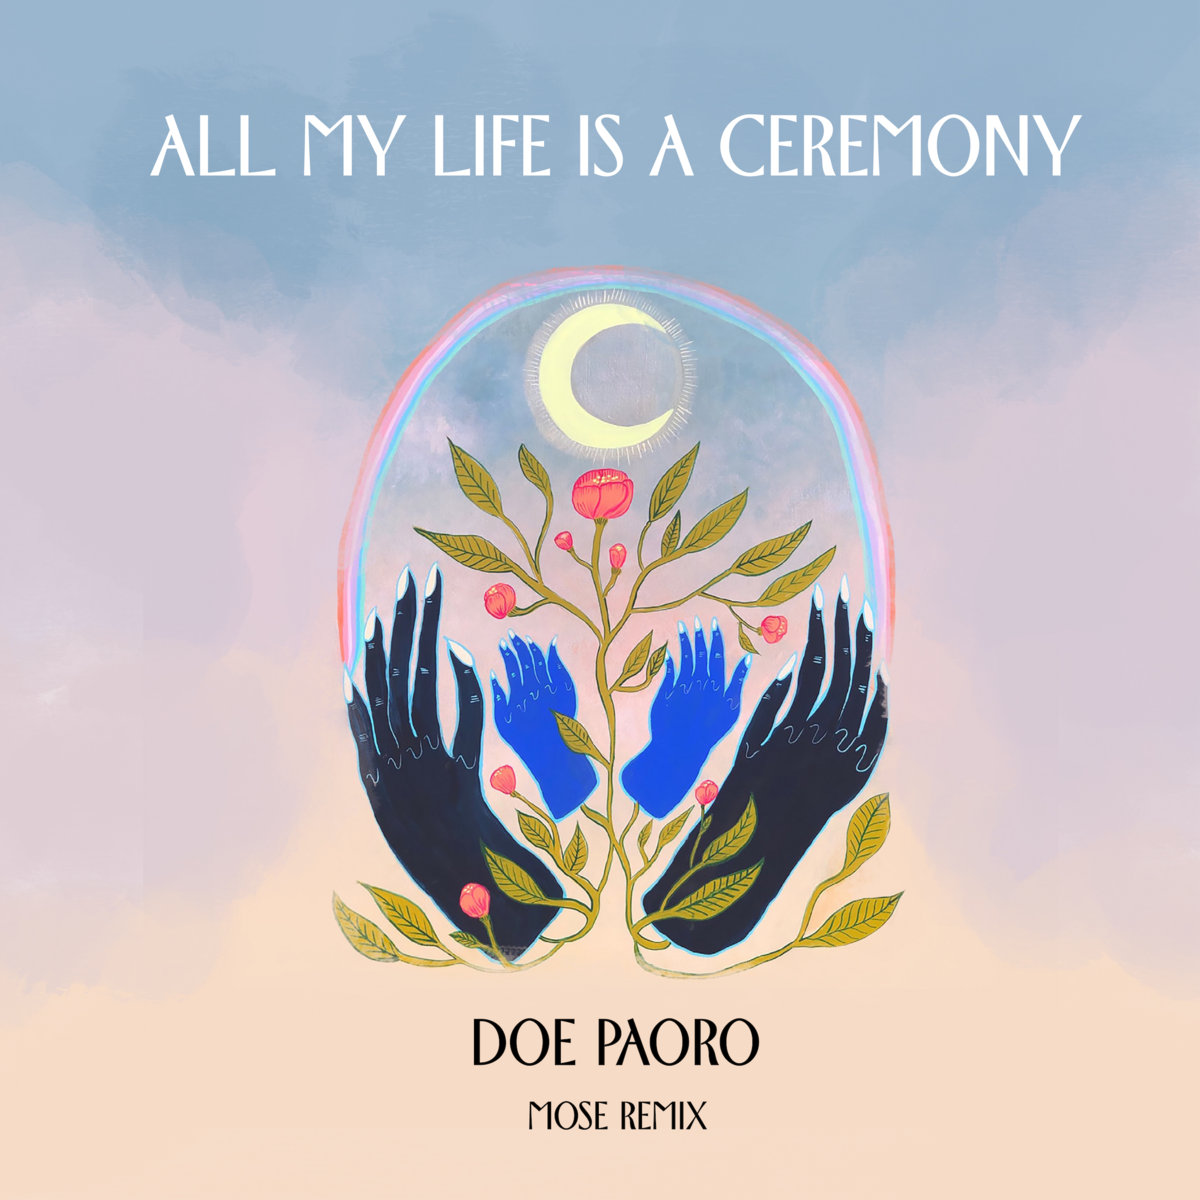 Doe Paoro - All My Life is a Ceremony (Mose Remix)